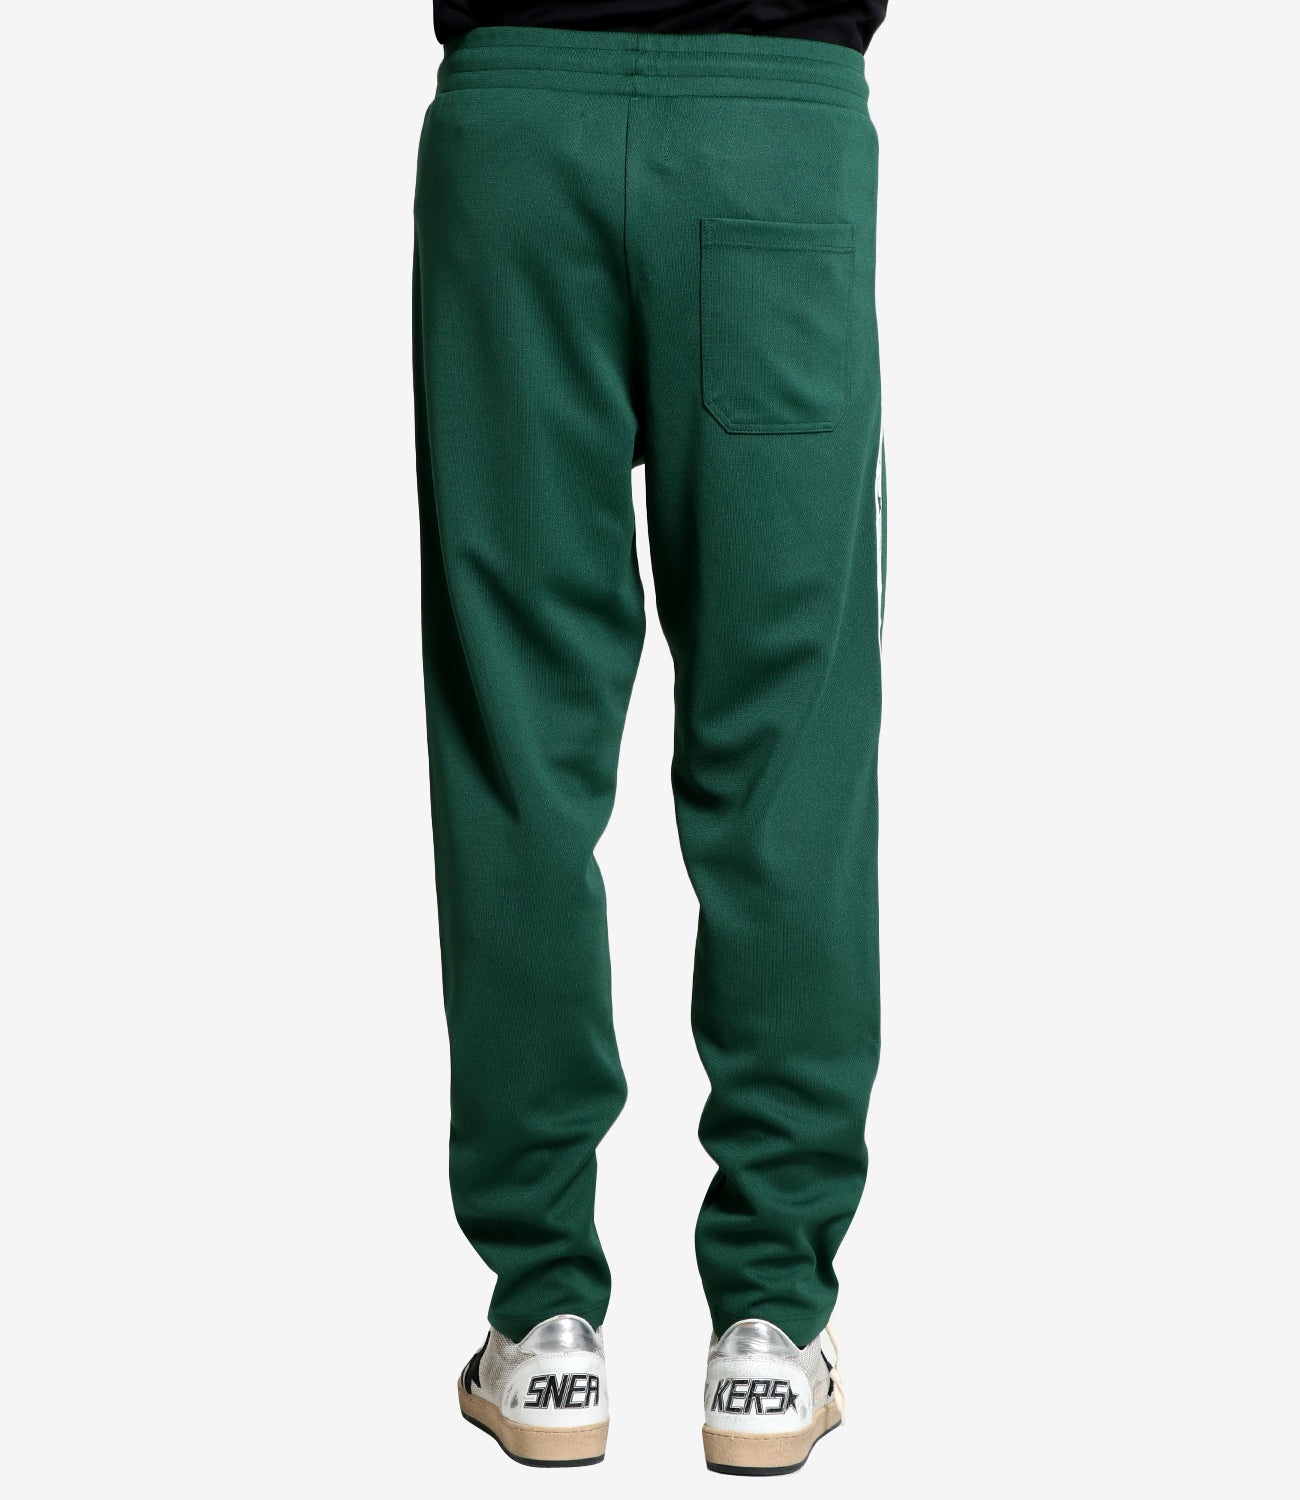 Golden Goose | Green and White Sporty Pants